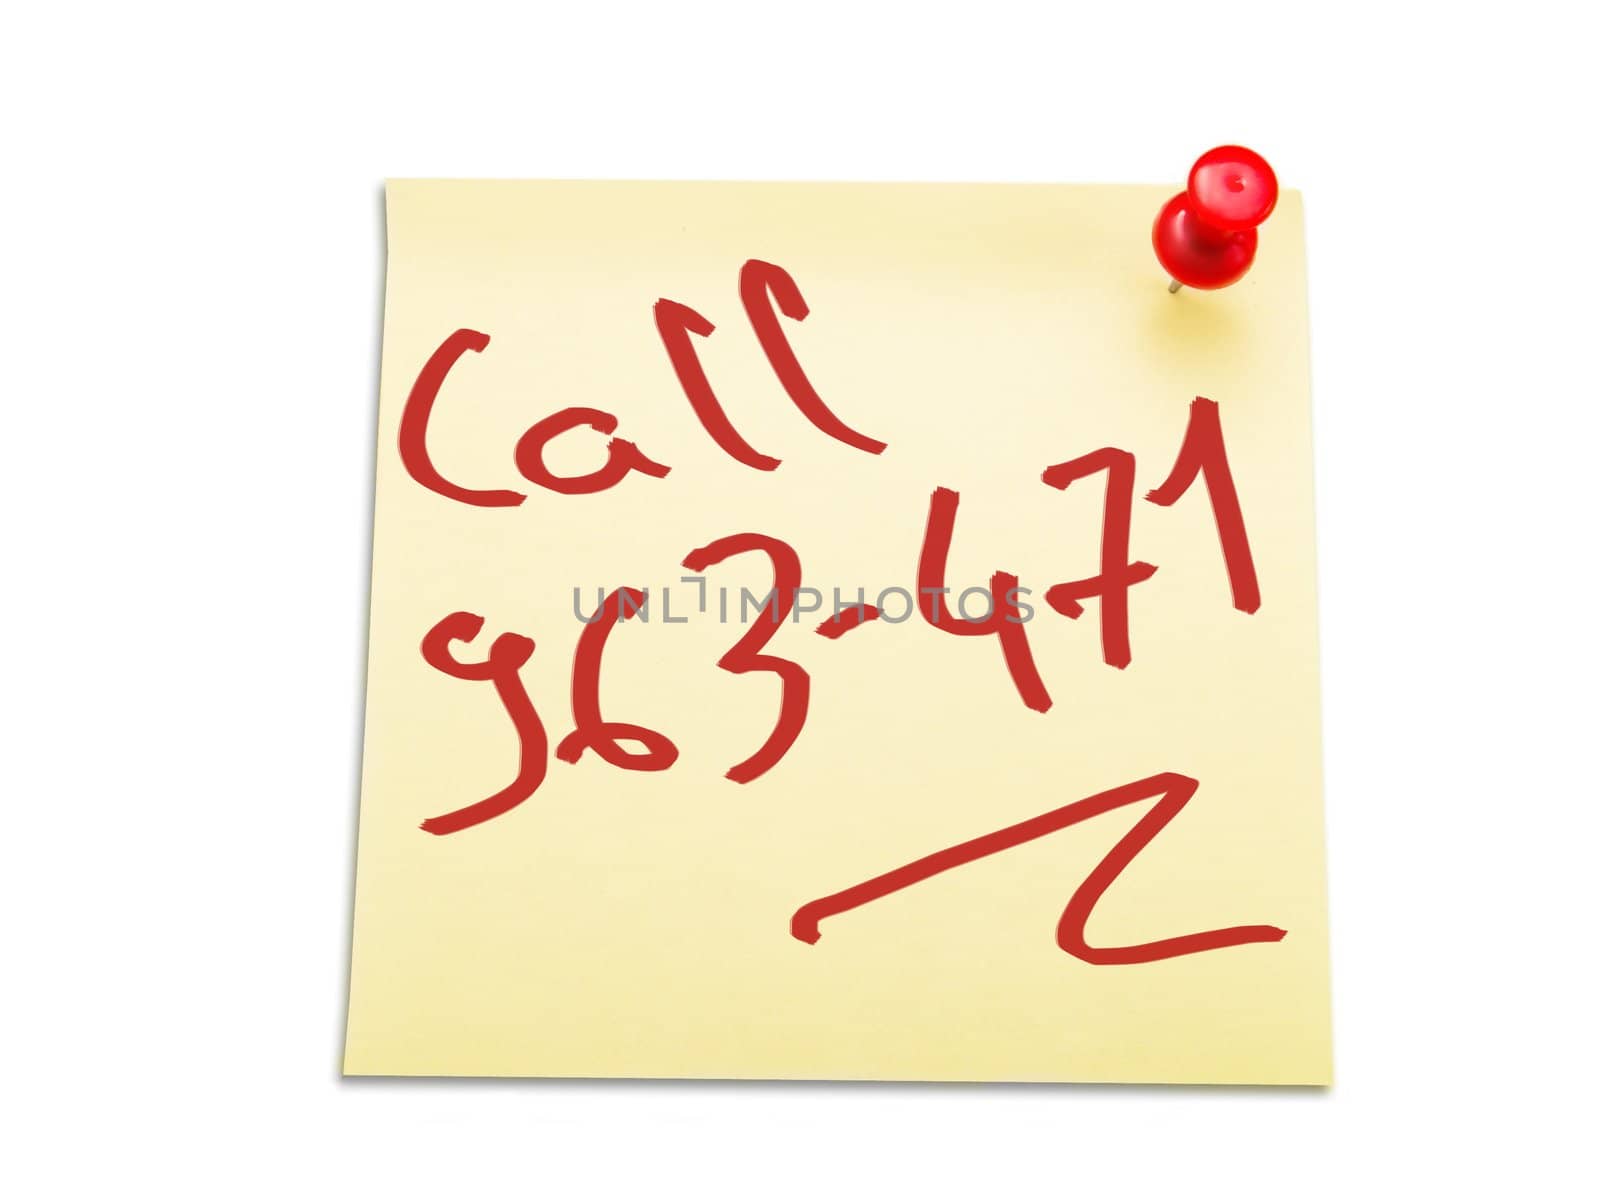 Call reminder on a yellow note paper